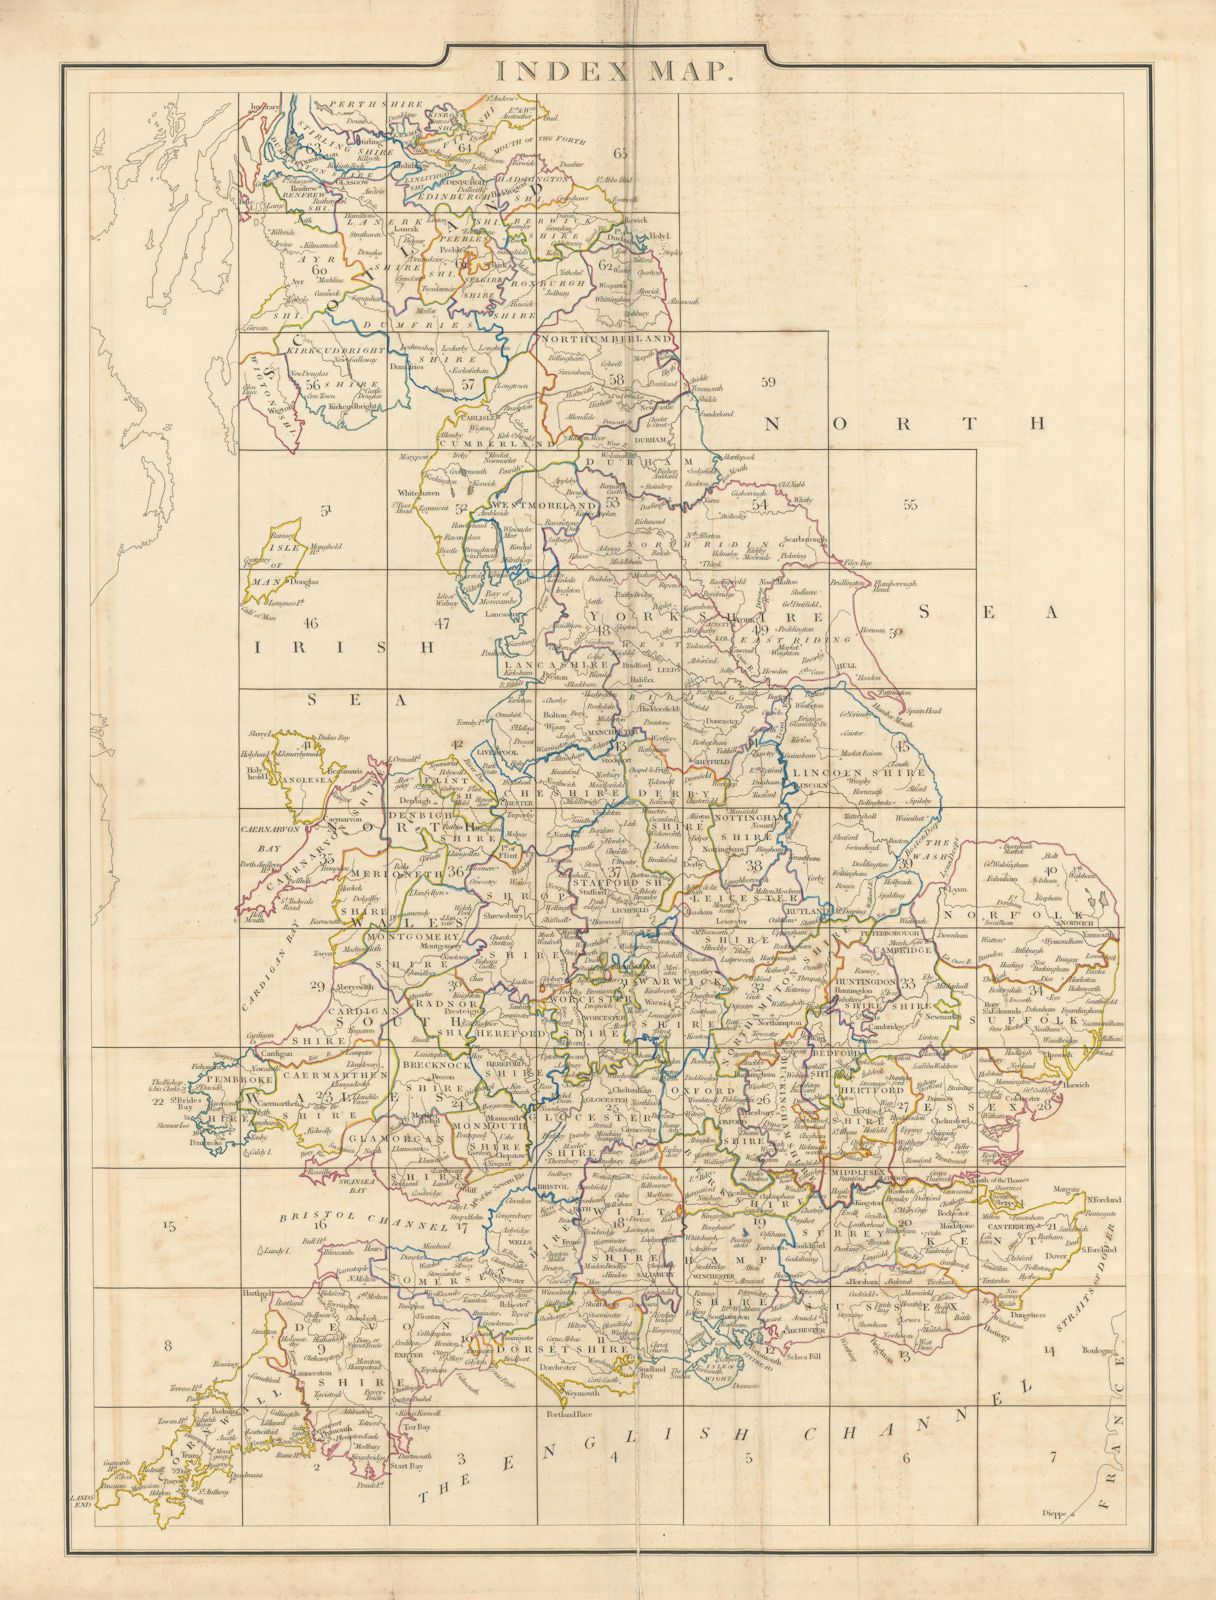 Associate Product Cary's Improved Map of England and Wales - Index map. G. & J. Cary 1832